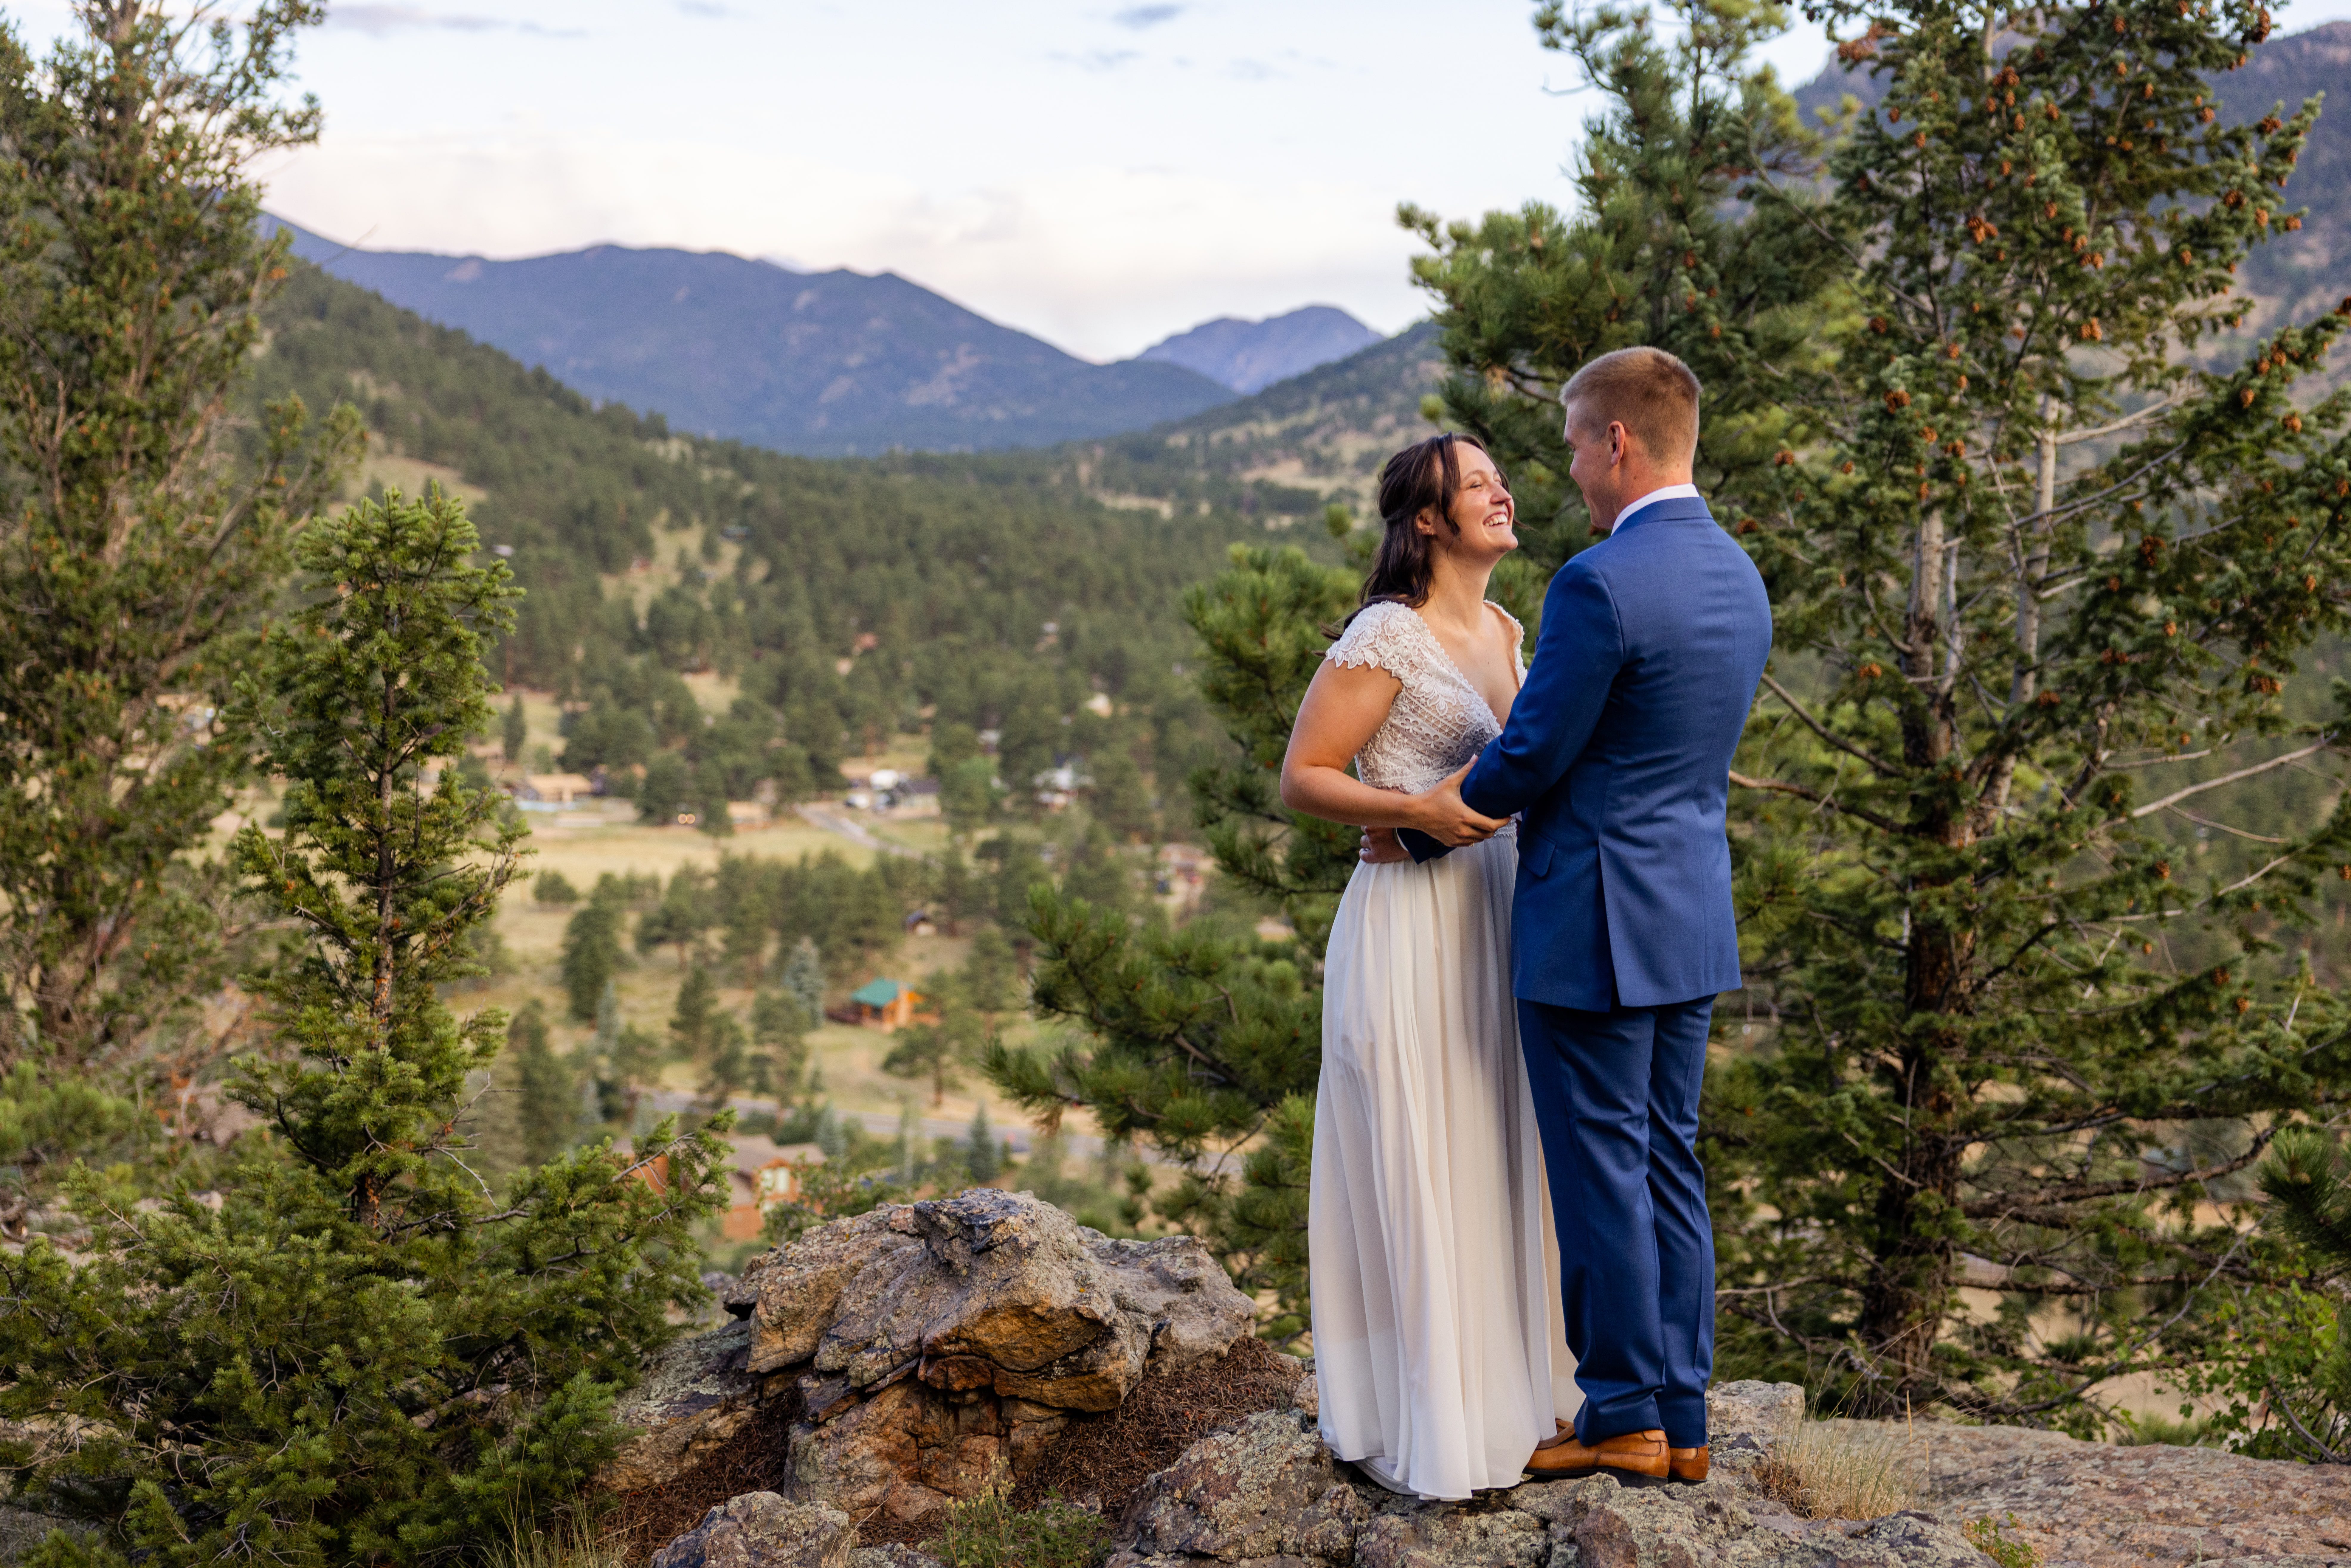 the bride and groom explore the trail at Romantic RiverSong Inn in Estes Park on their wedding day